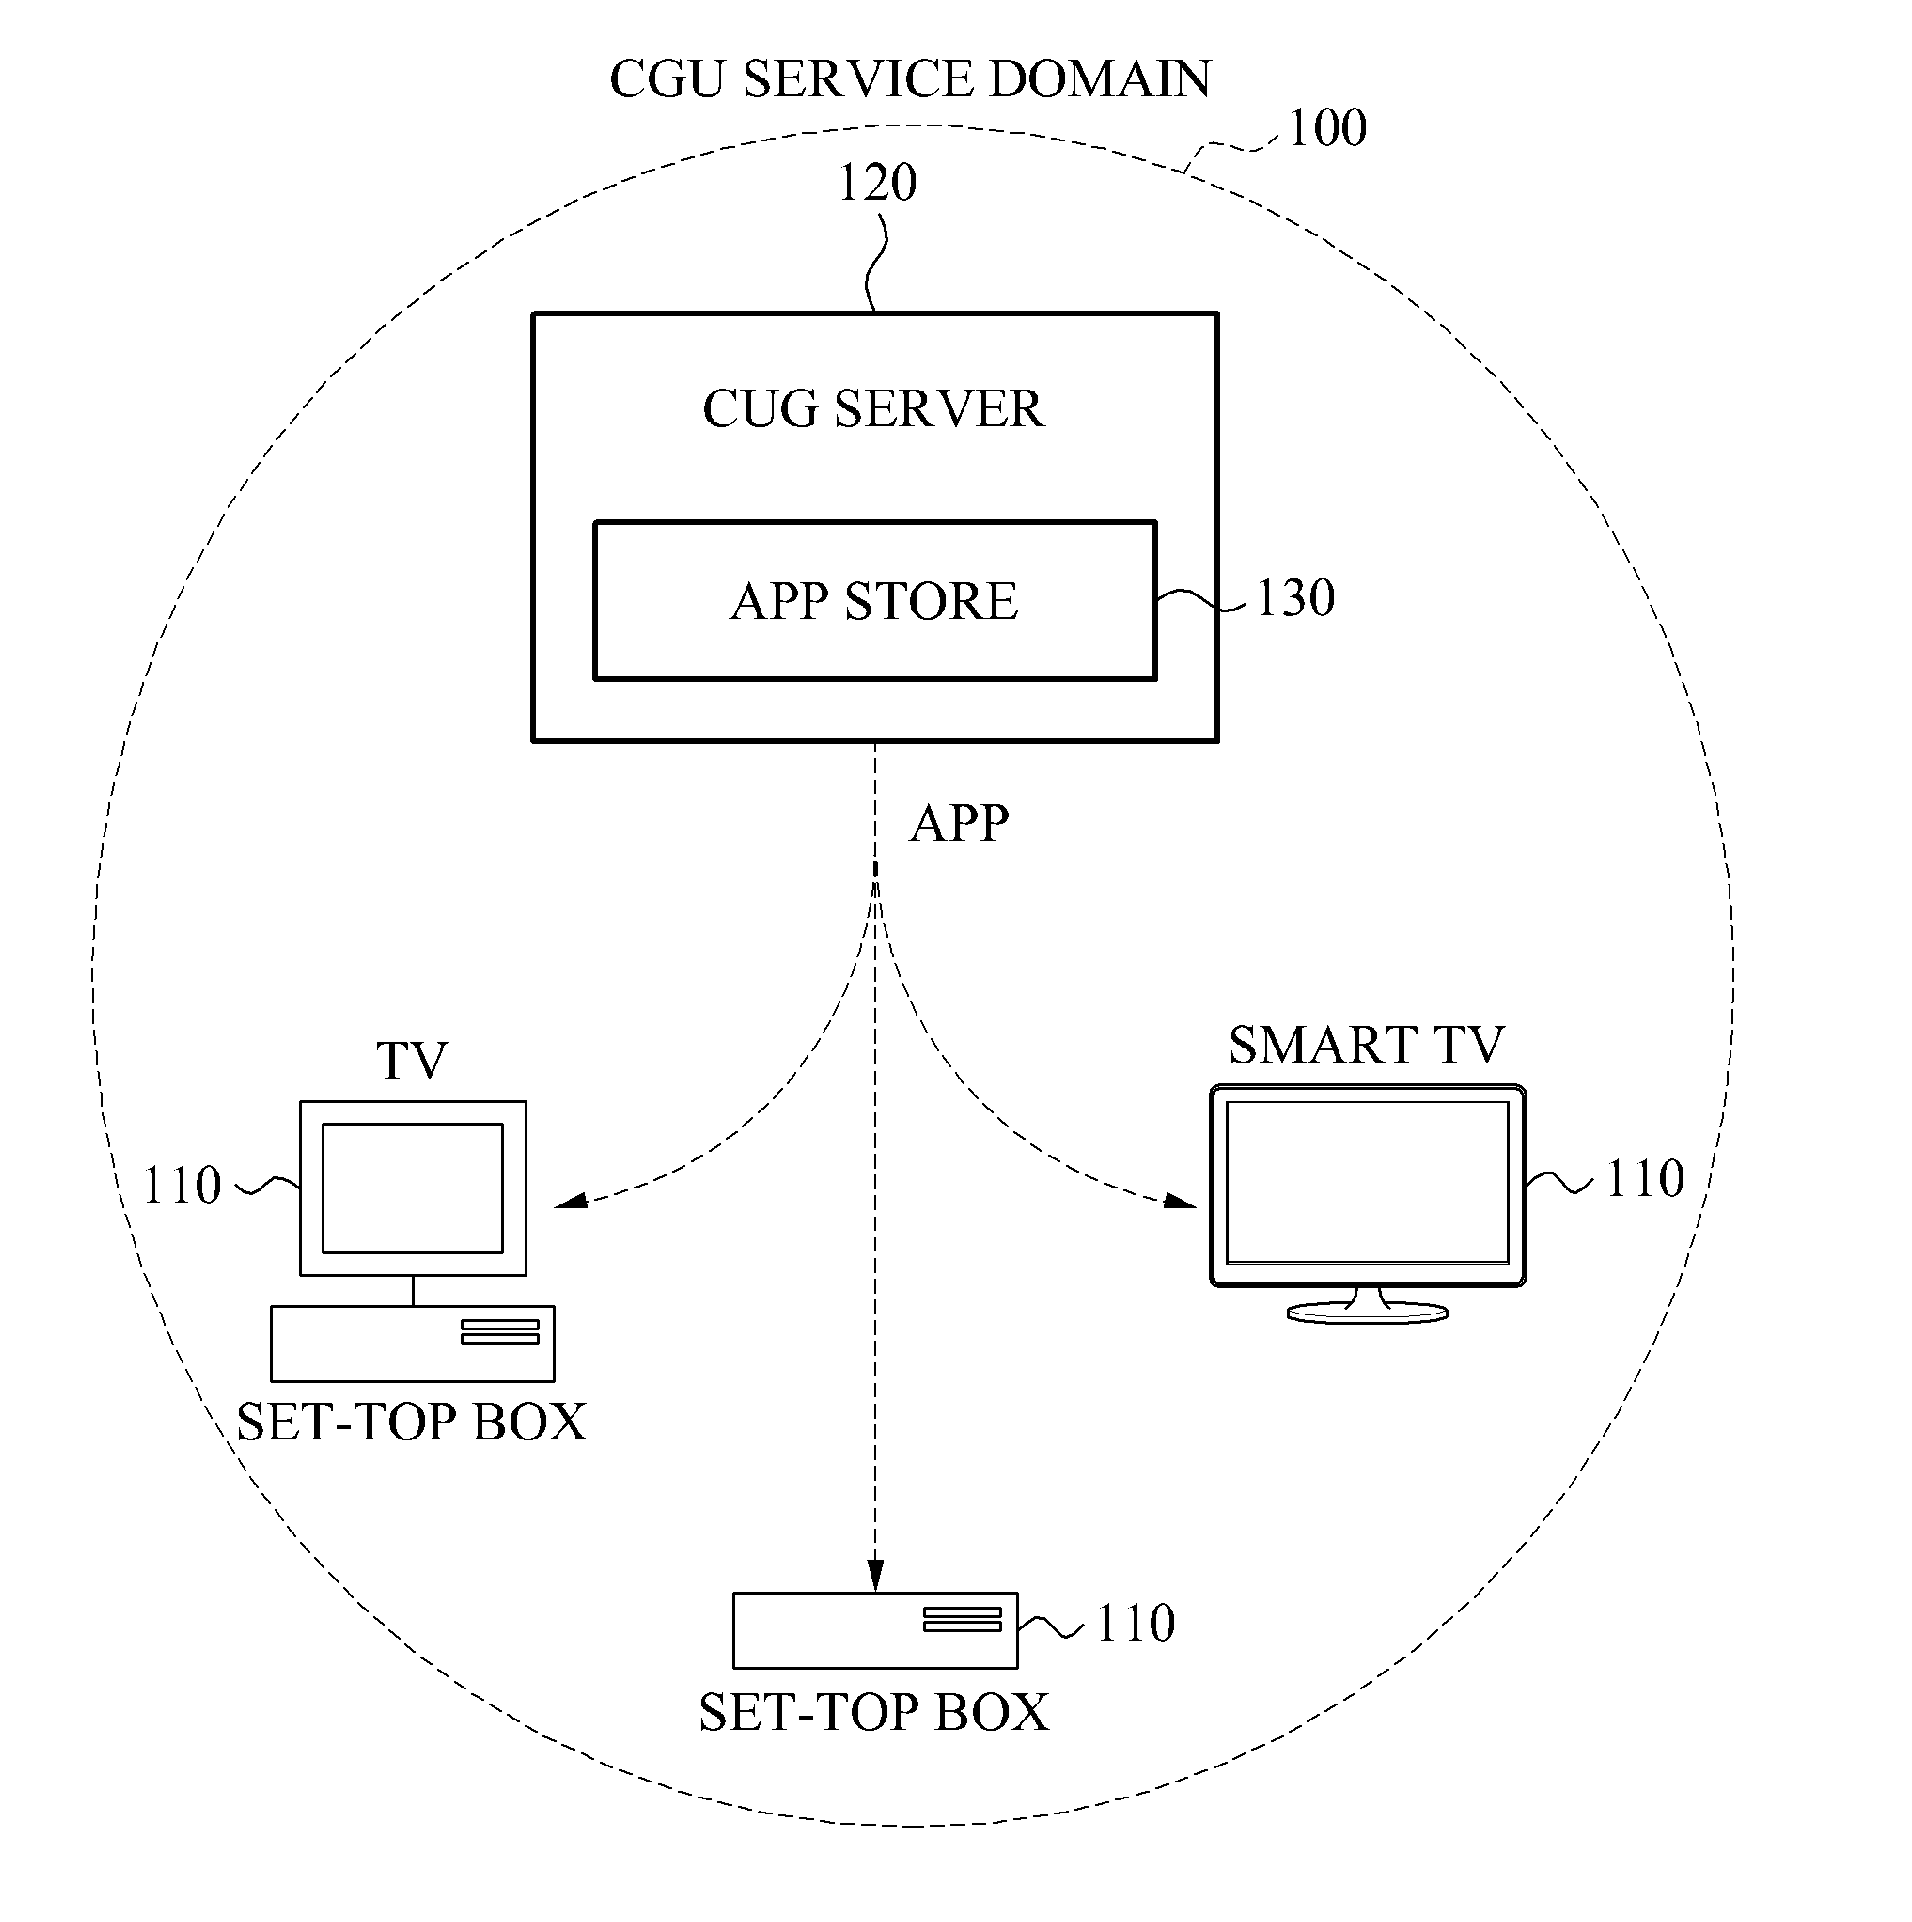 Apparatus for providing service linking closed user groups based on smart television and smart set-top box